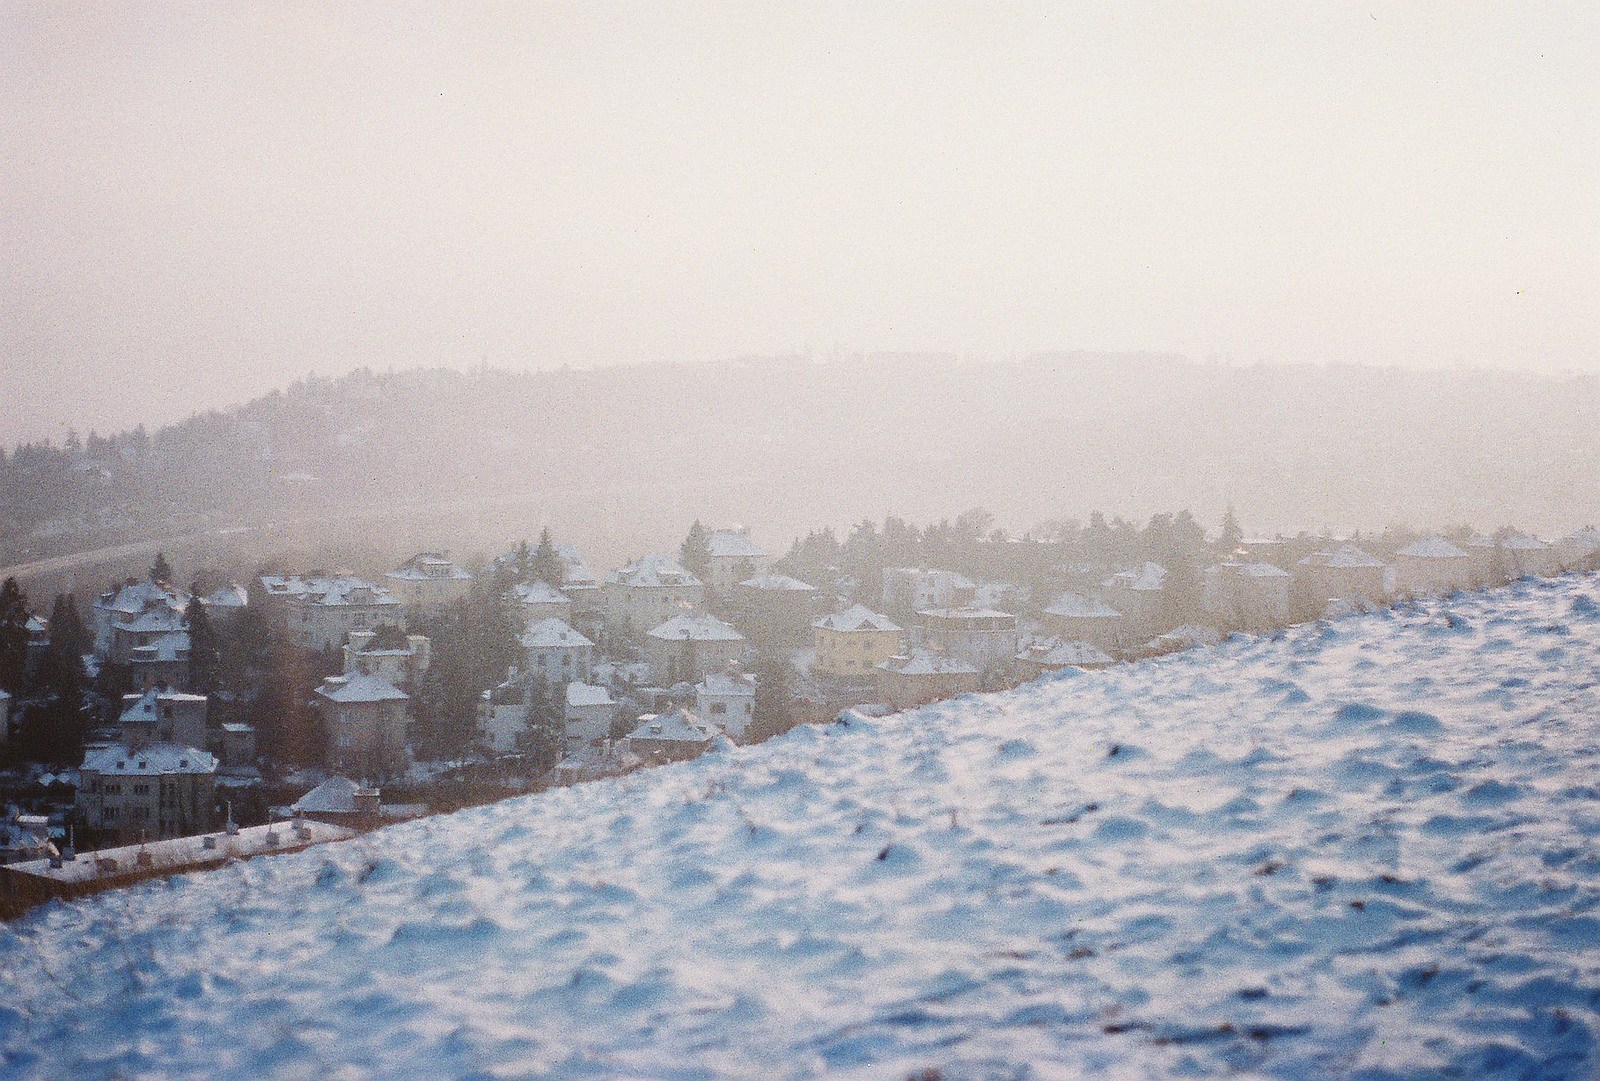 Things Only People With Seasonal Affective Disorder Can Understand